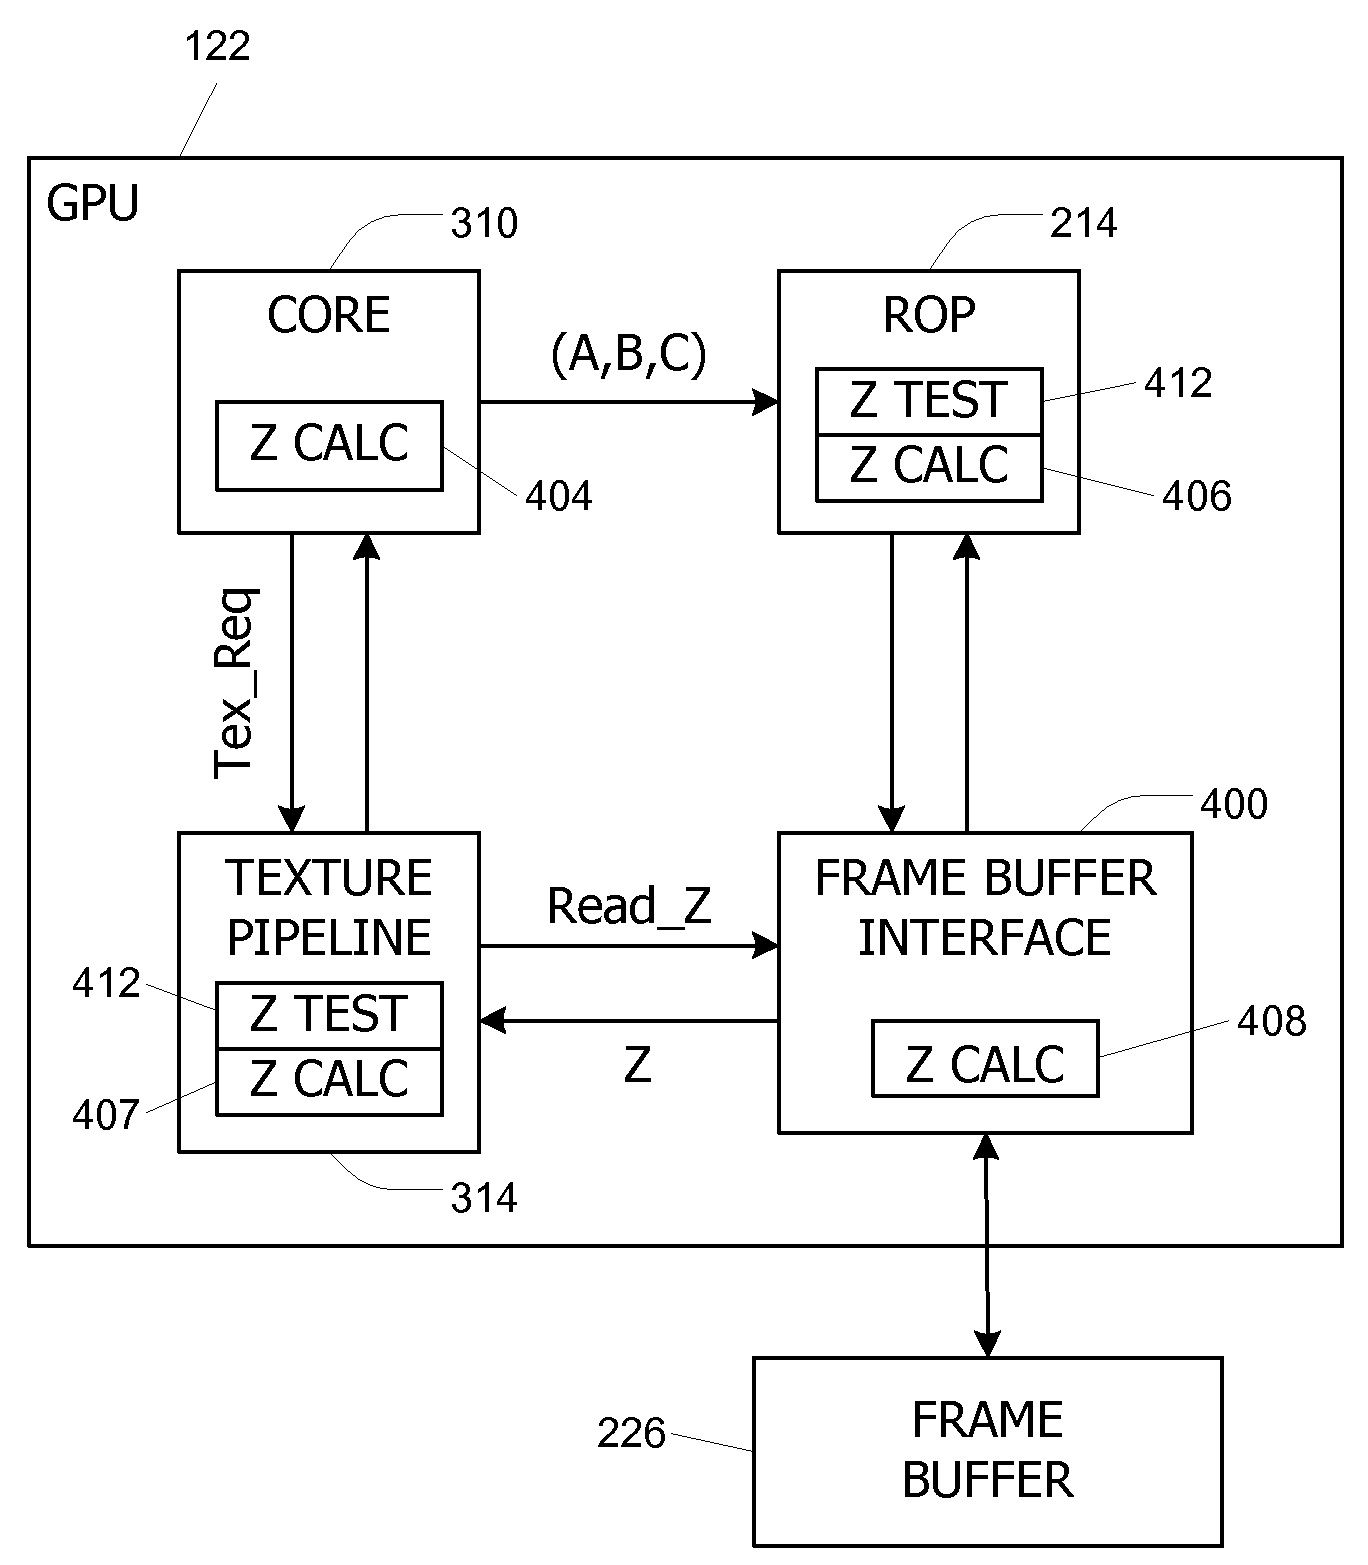 Method and apparatus to ensure consistency of depth values computed in different sections of a graphics processor